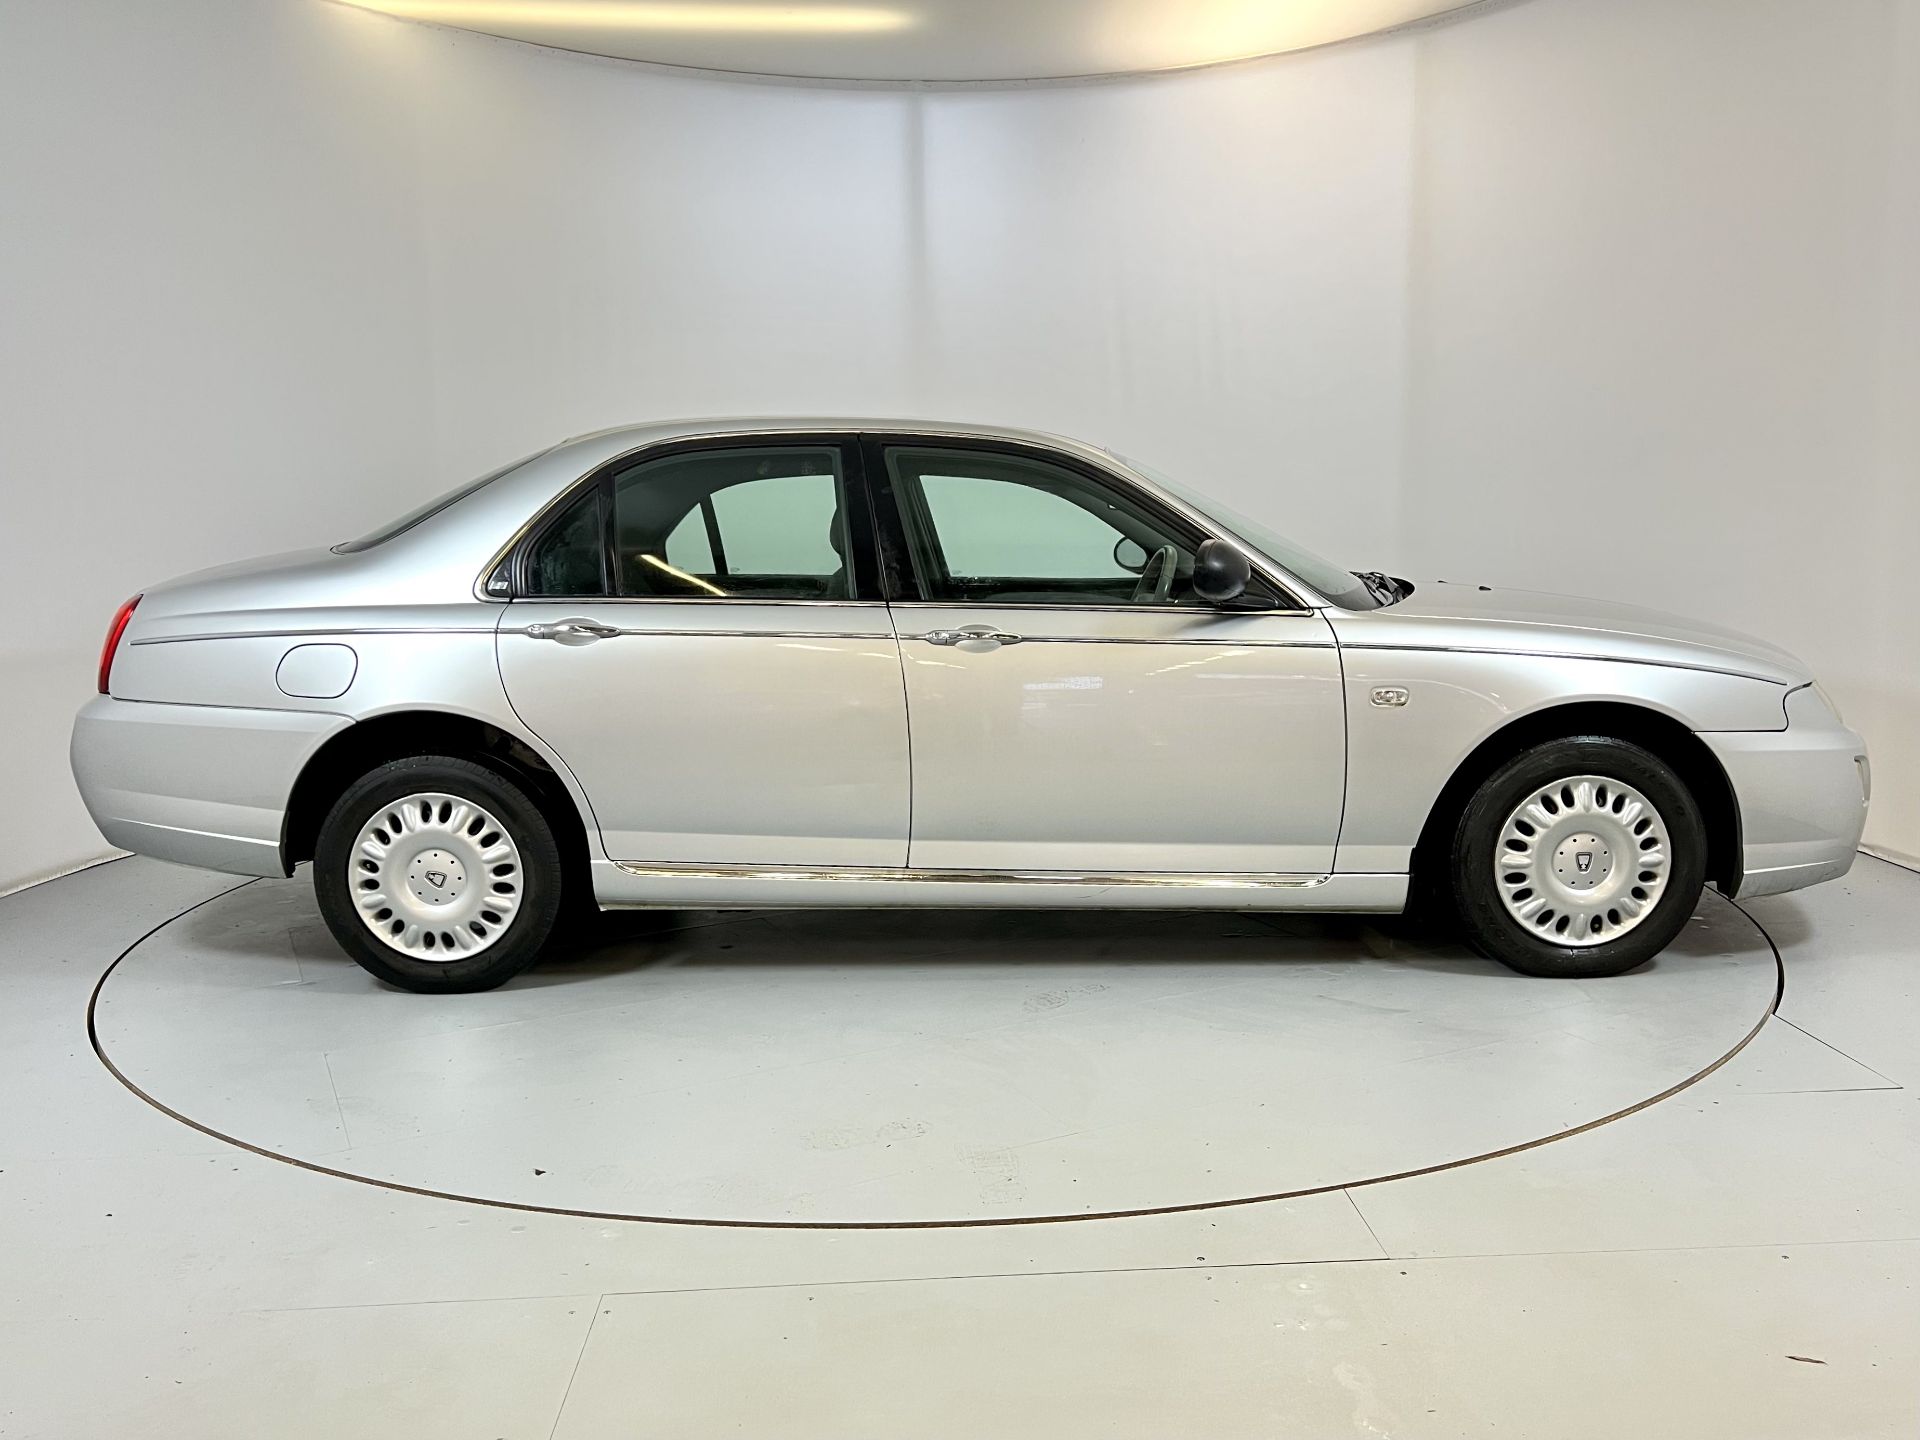 Rover 75 - Image 11 of 33